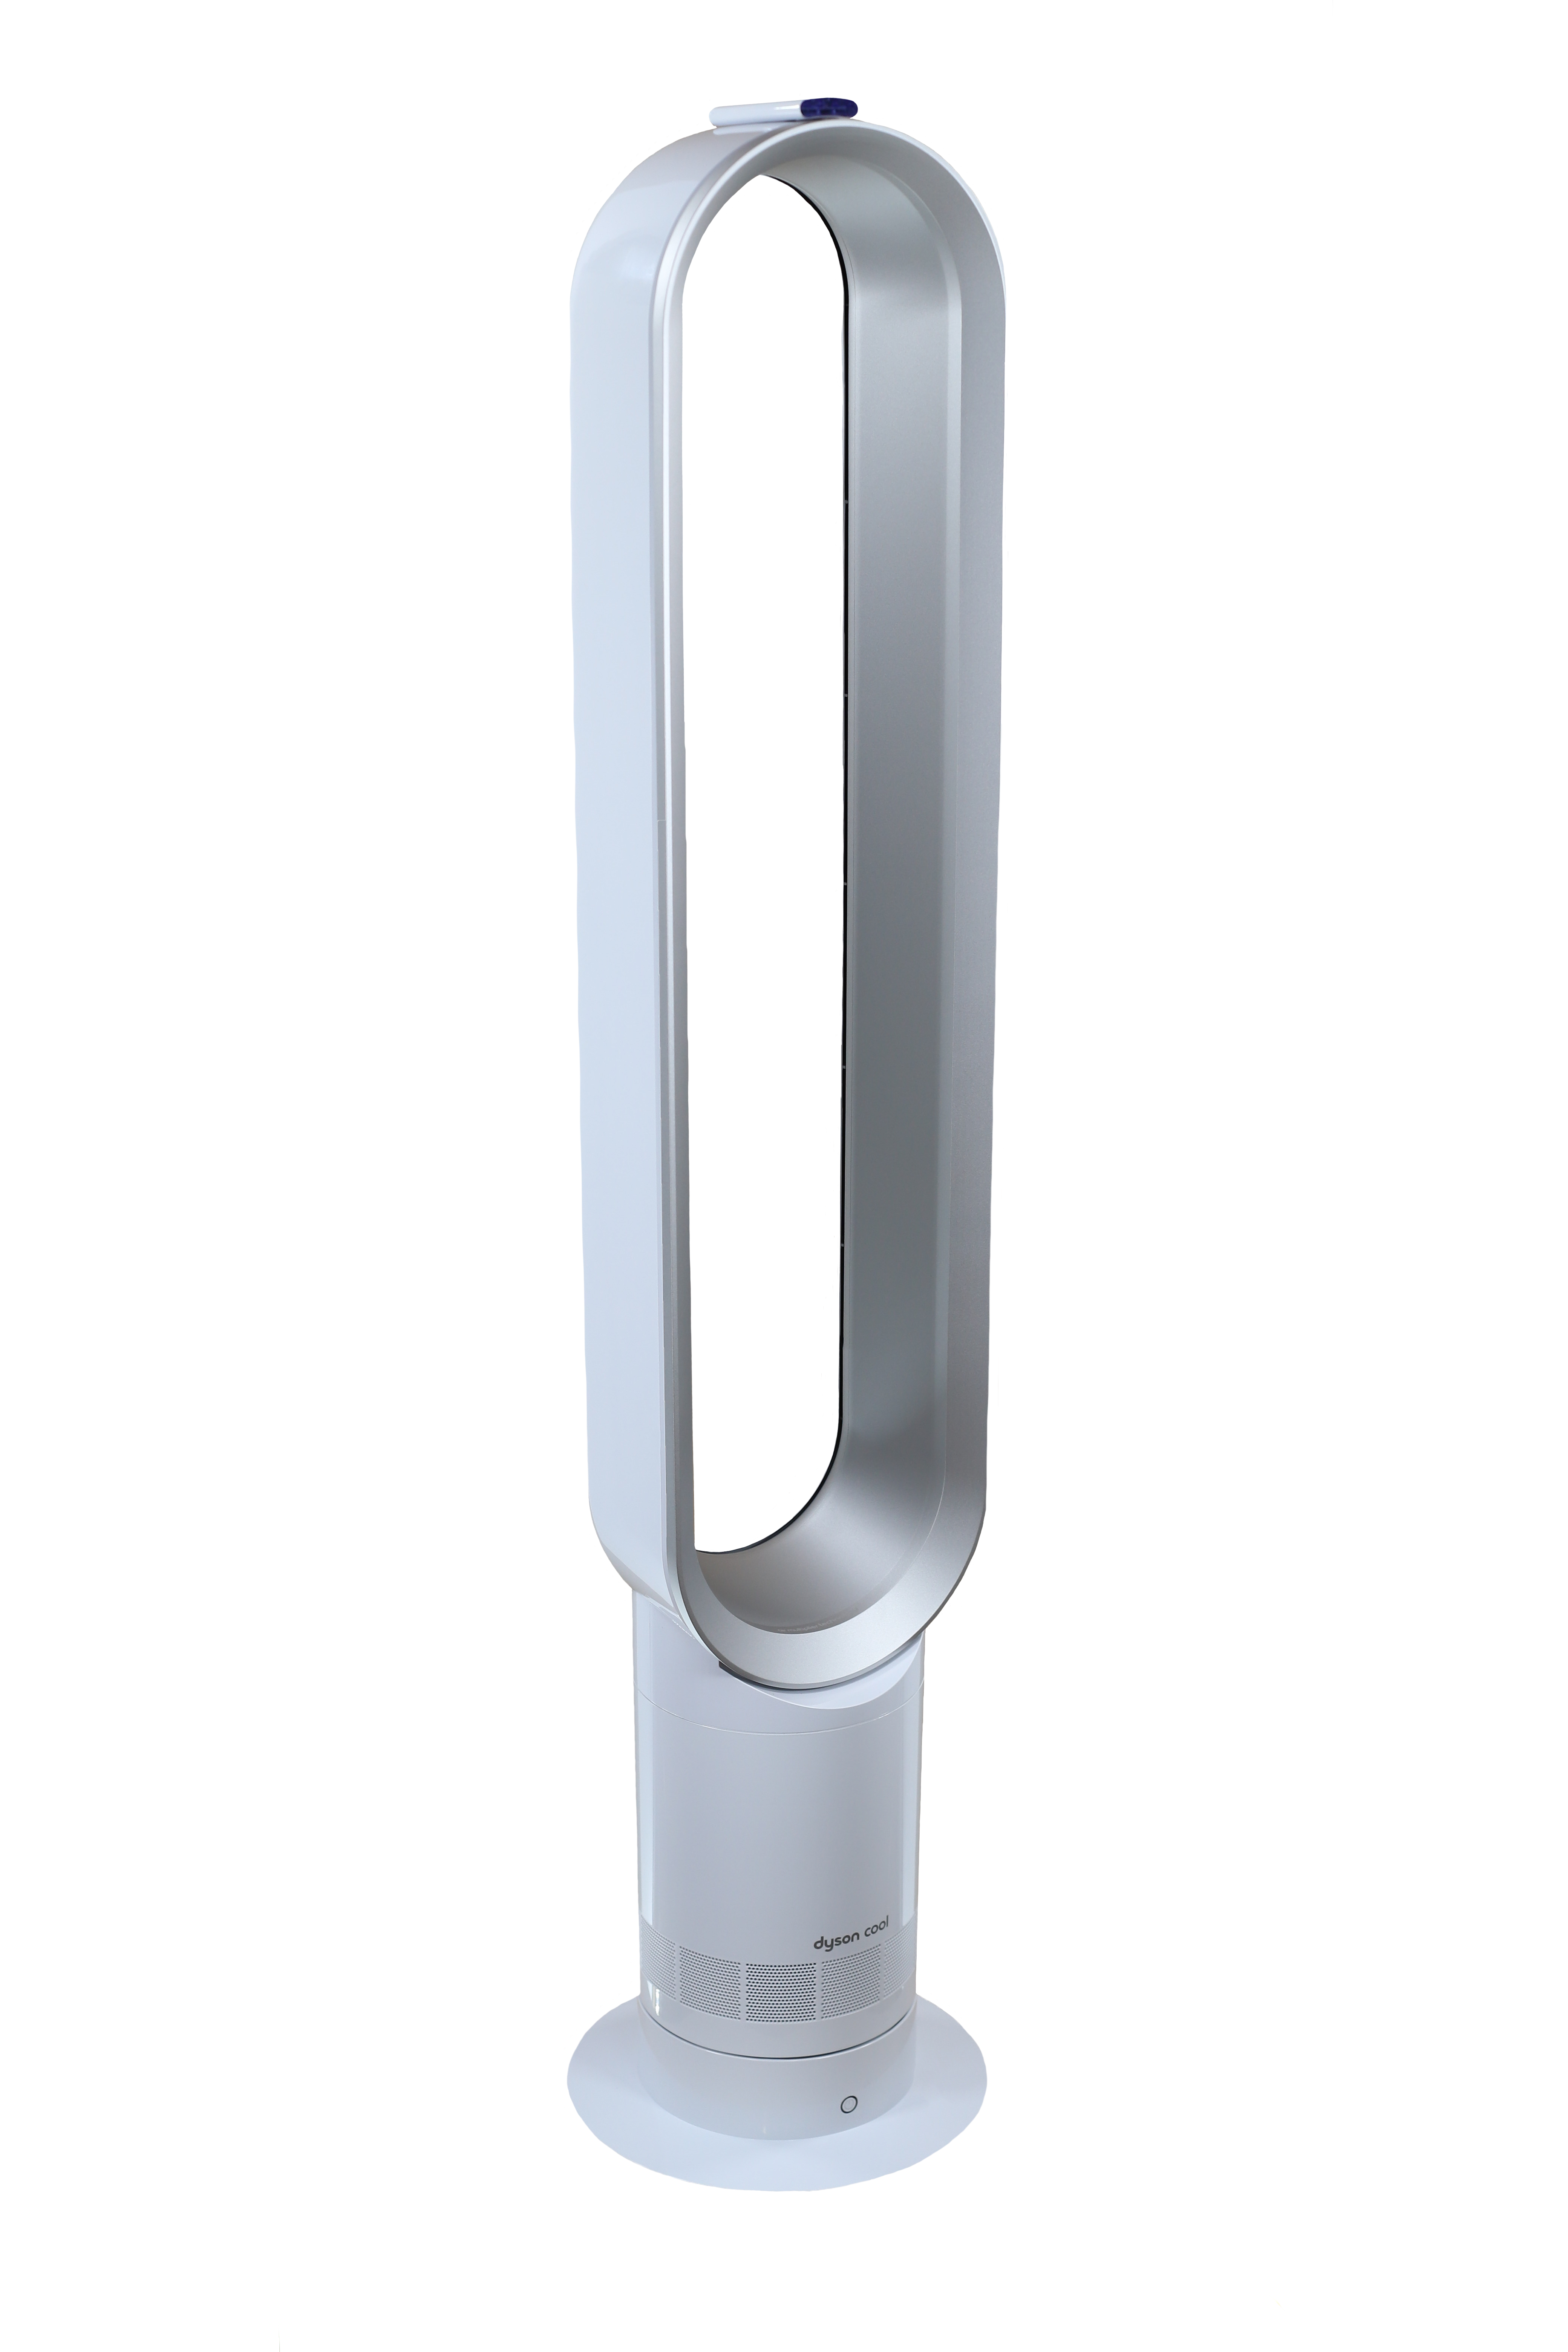 Rent Dyson Cool Tower Fan from €19.90 per month